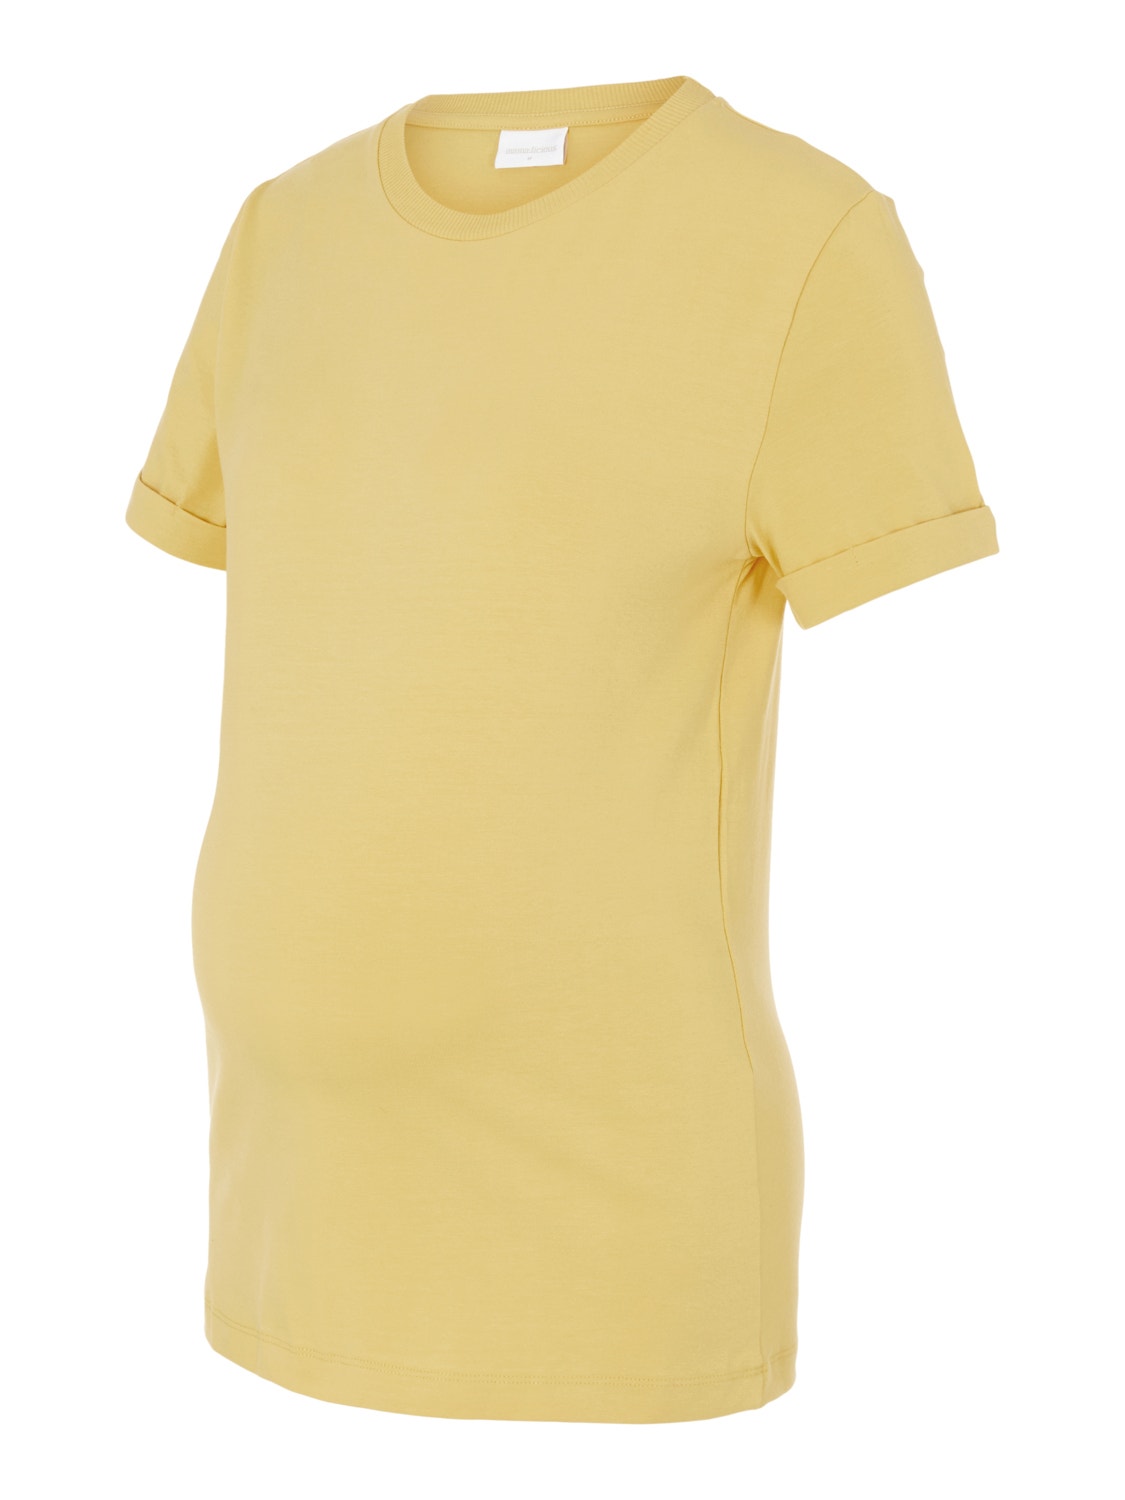 MAMA.LICIOUS Loose Fit Hoodie T-Shirt -Misted Yellow - 20015172